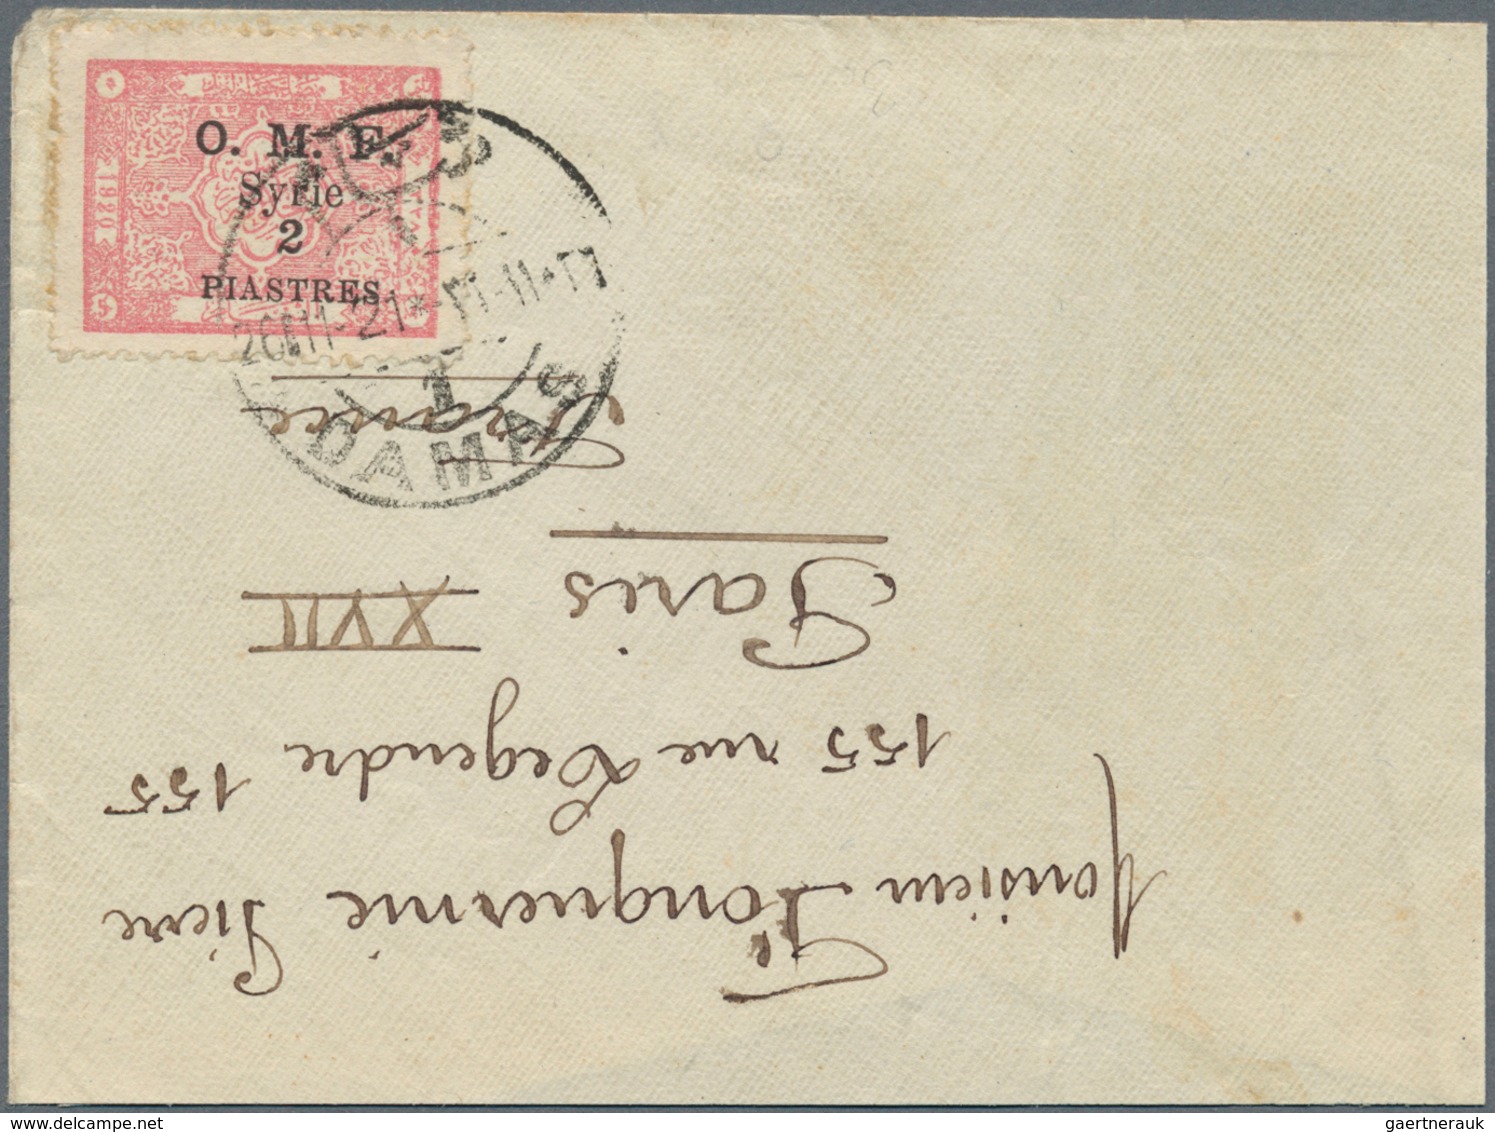 Syrien: 1919/1956, collection on stockpages incl. apprx. 53 covers/cards/ppc with many interesting p